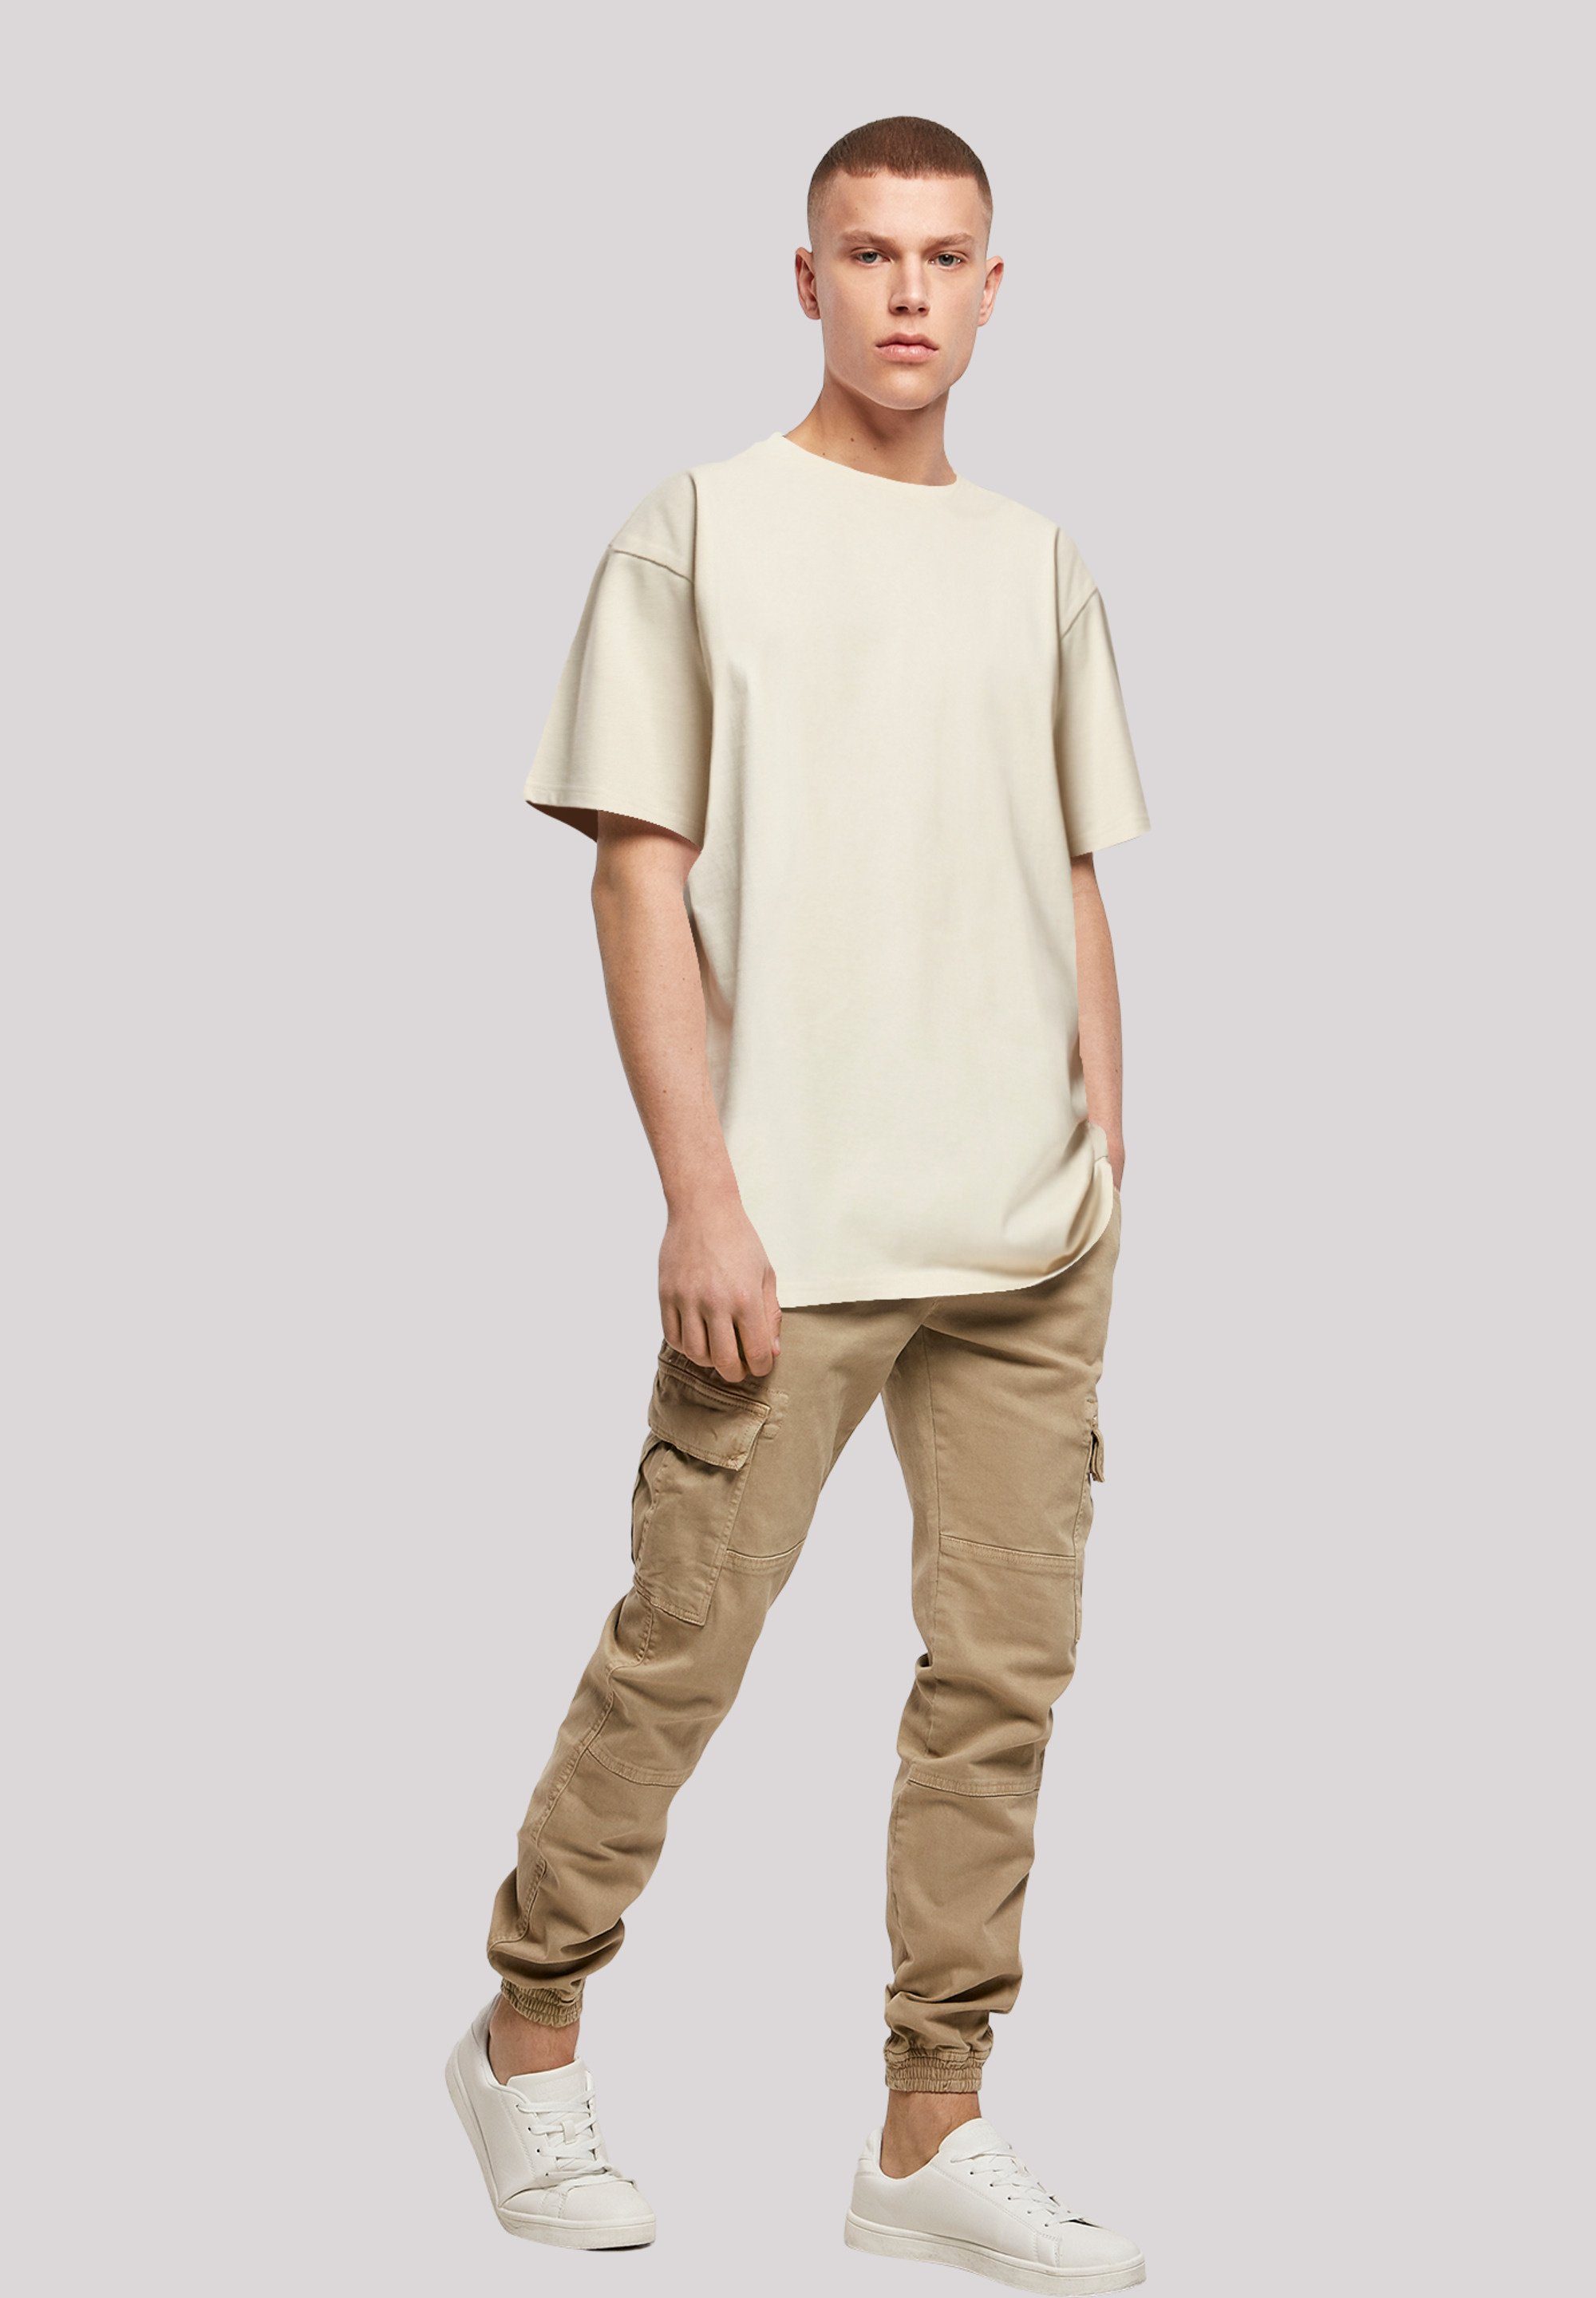 F4NT4STIC T-Shirt Wavy Schach Print Muster sand